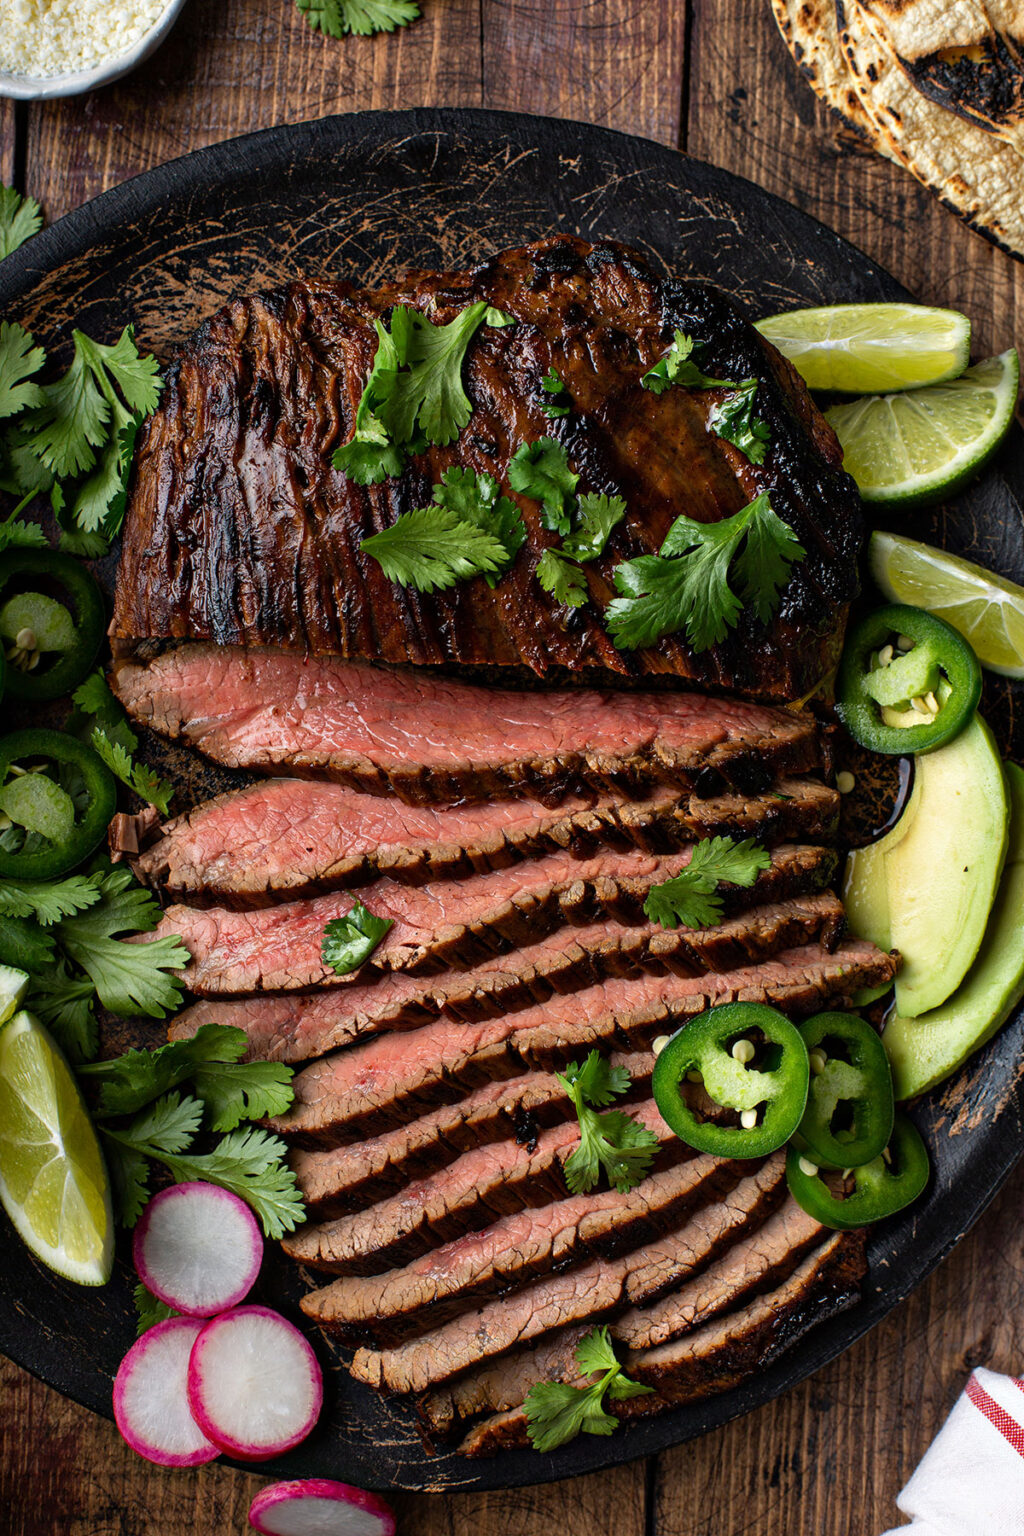 Authentic Carne Asada: Savoring the Delights of Flank Steak